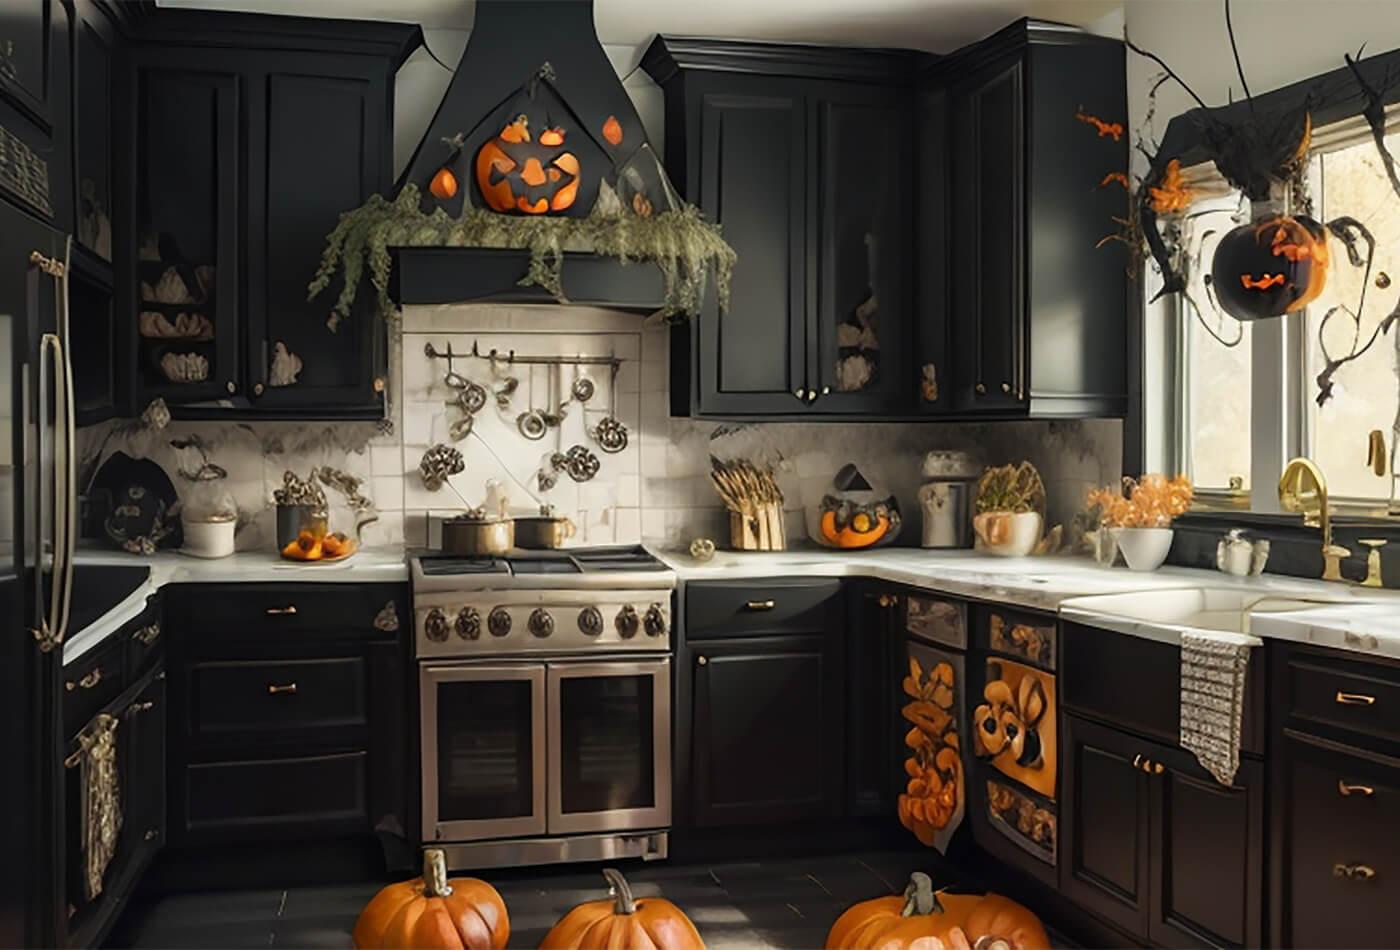 Dark Kitchen Cabinets That Goes Well With Our Upcoming Halloween Season